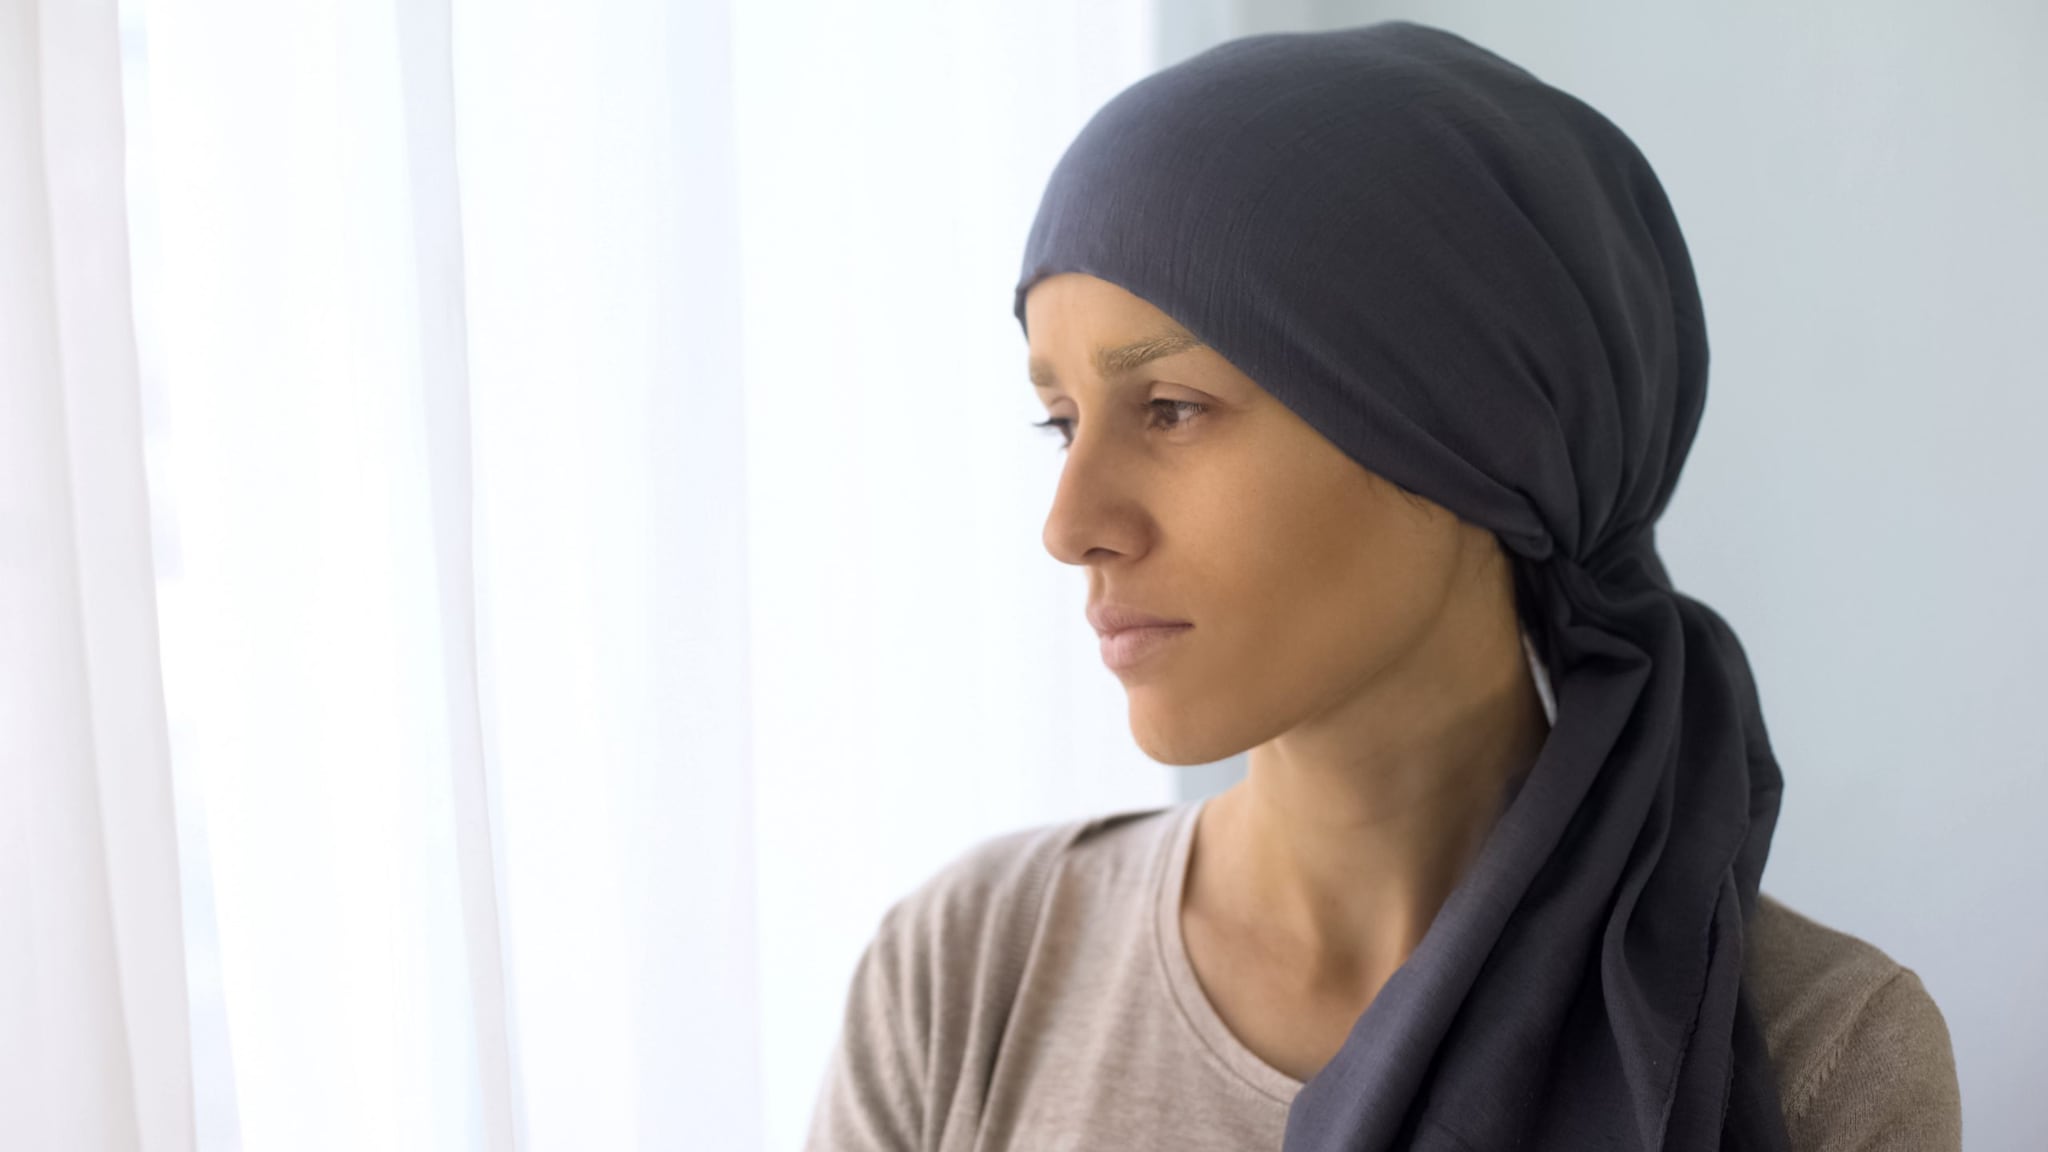 Photo of a woman with cancer, wearing a head covering, looking off into the distance.